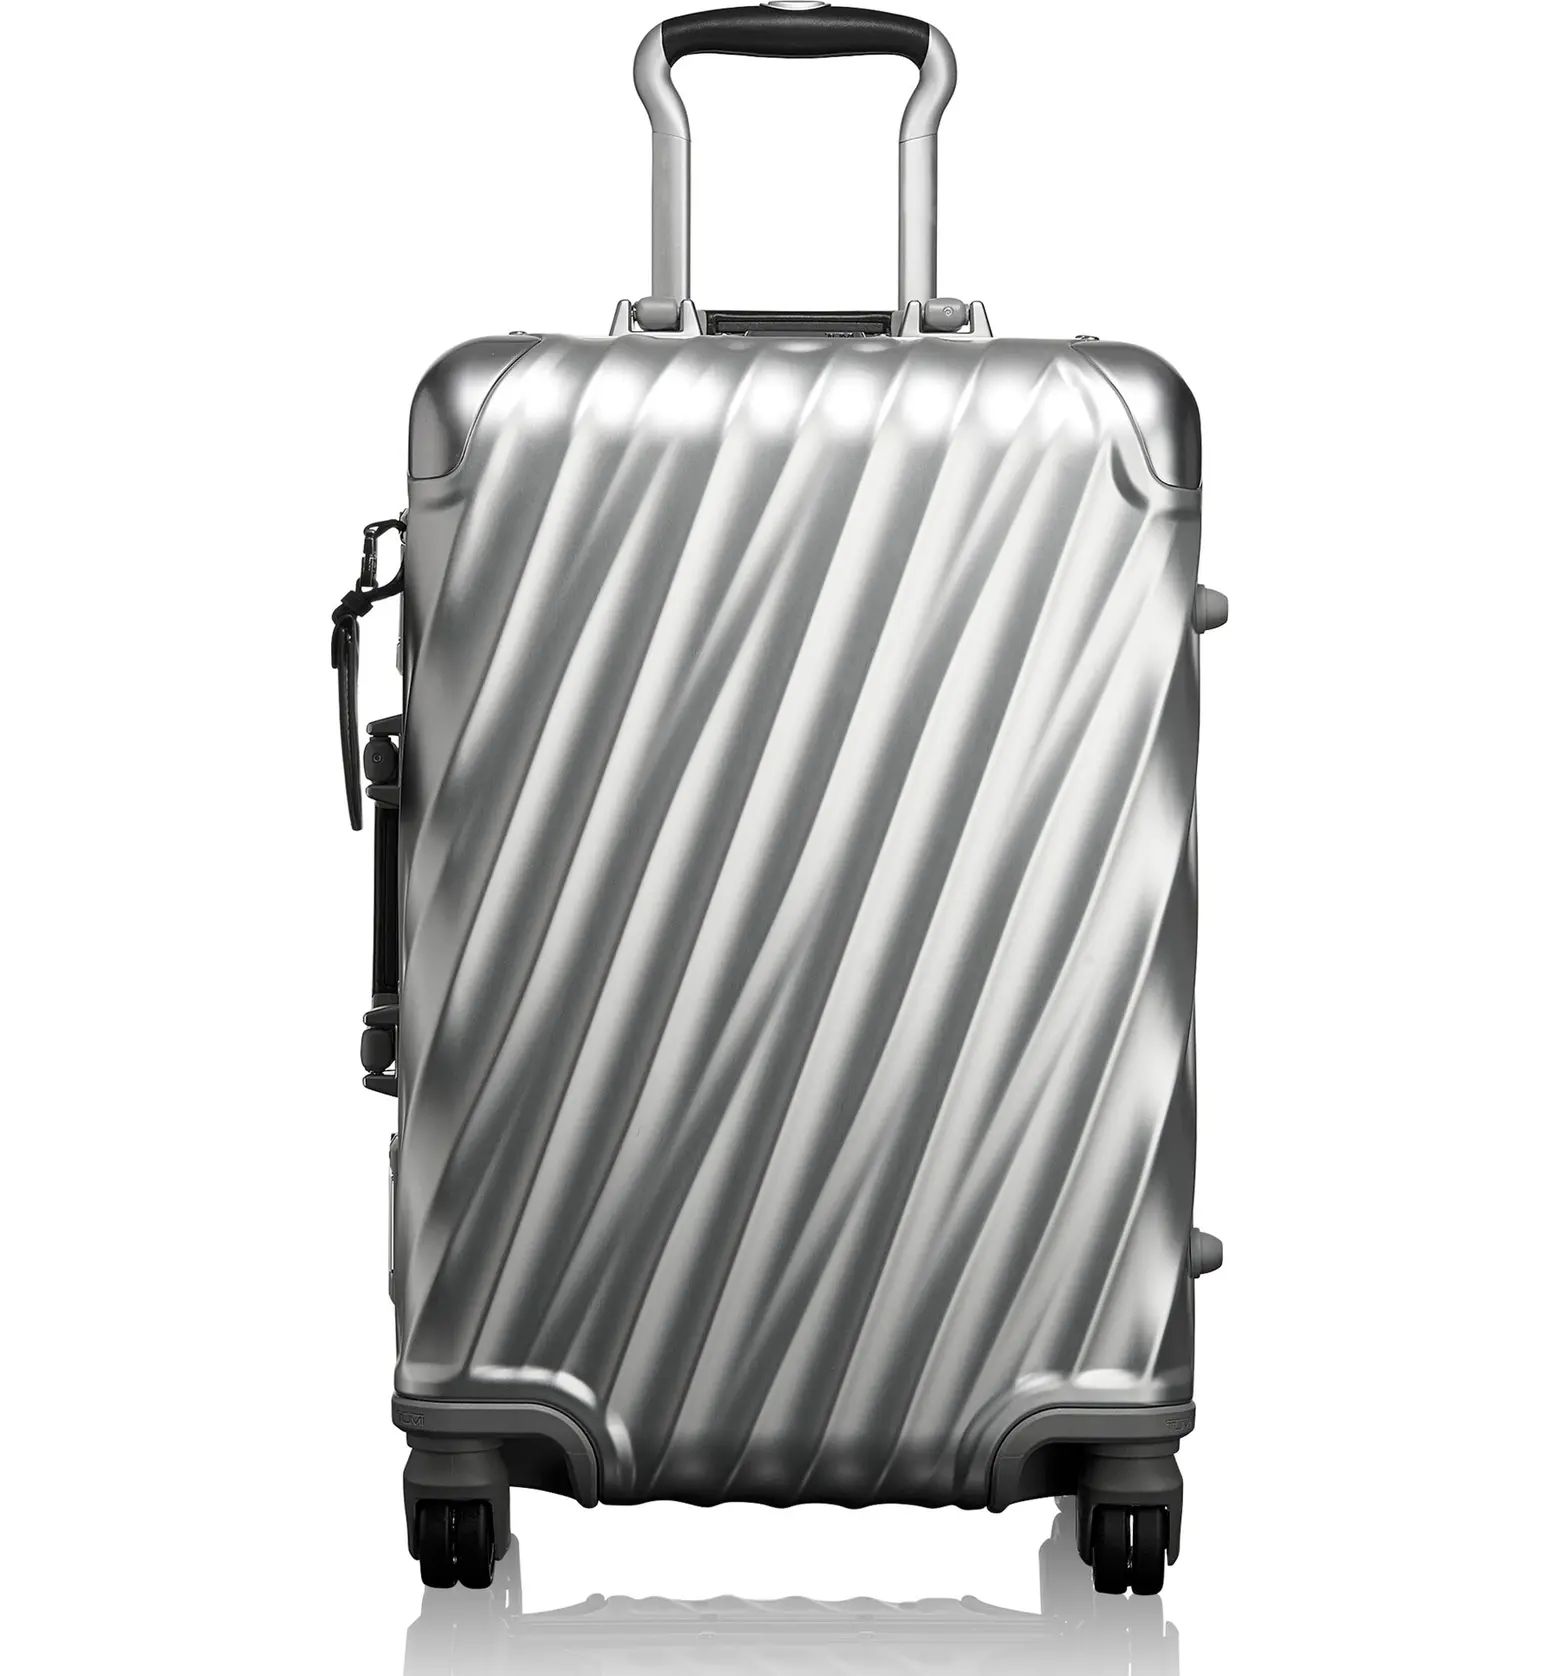 19 Degree 22-Inch Wheeled Carry-On Bag | Nordstrom